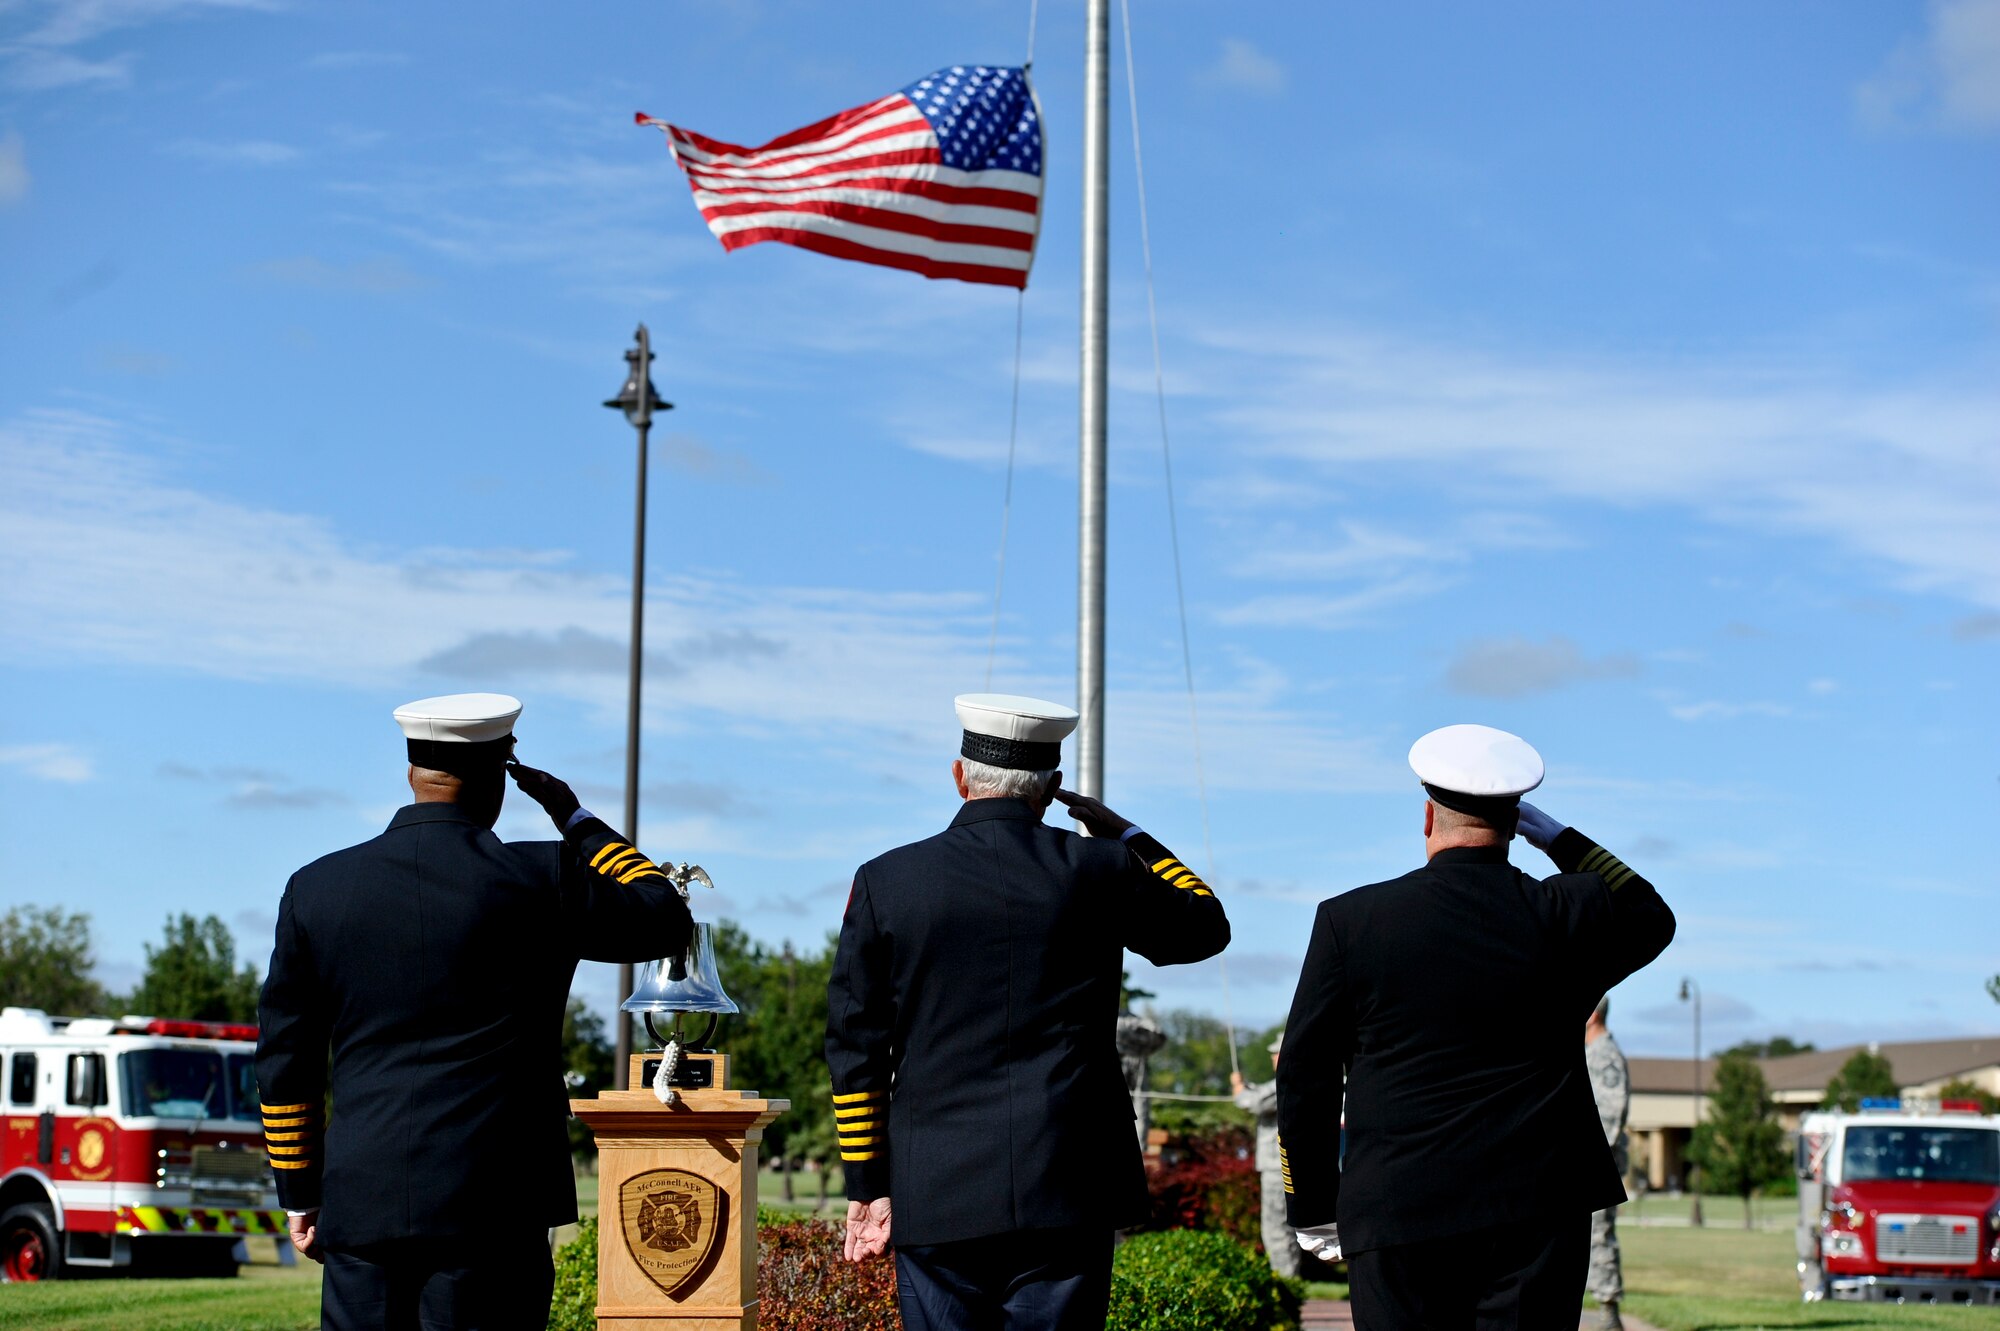 First responders salute the American flag during a Patriot Day ceremony Sept. 11, 2014, at McConnell Air Force Base, Kan. The ceremony was held in honor of the nearly 3,000 people who died during the 9/11 attacks. (U.S. Air Force photo/Airman 1st Class John Linzmeier)